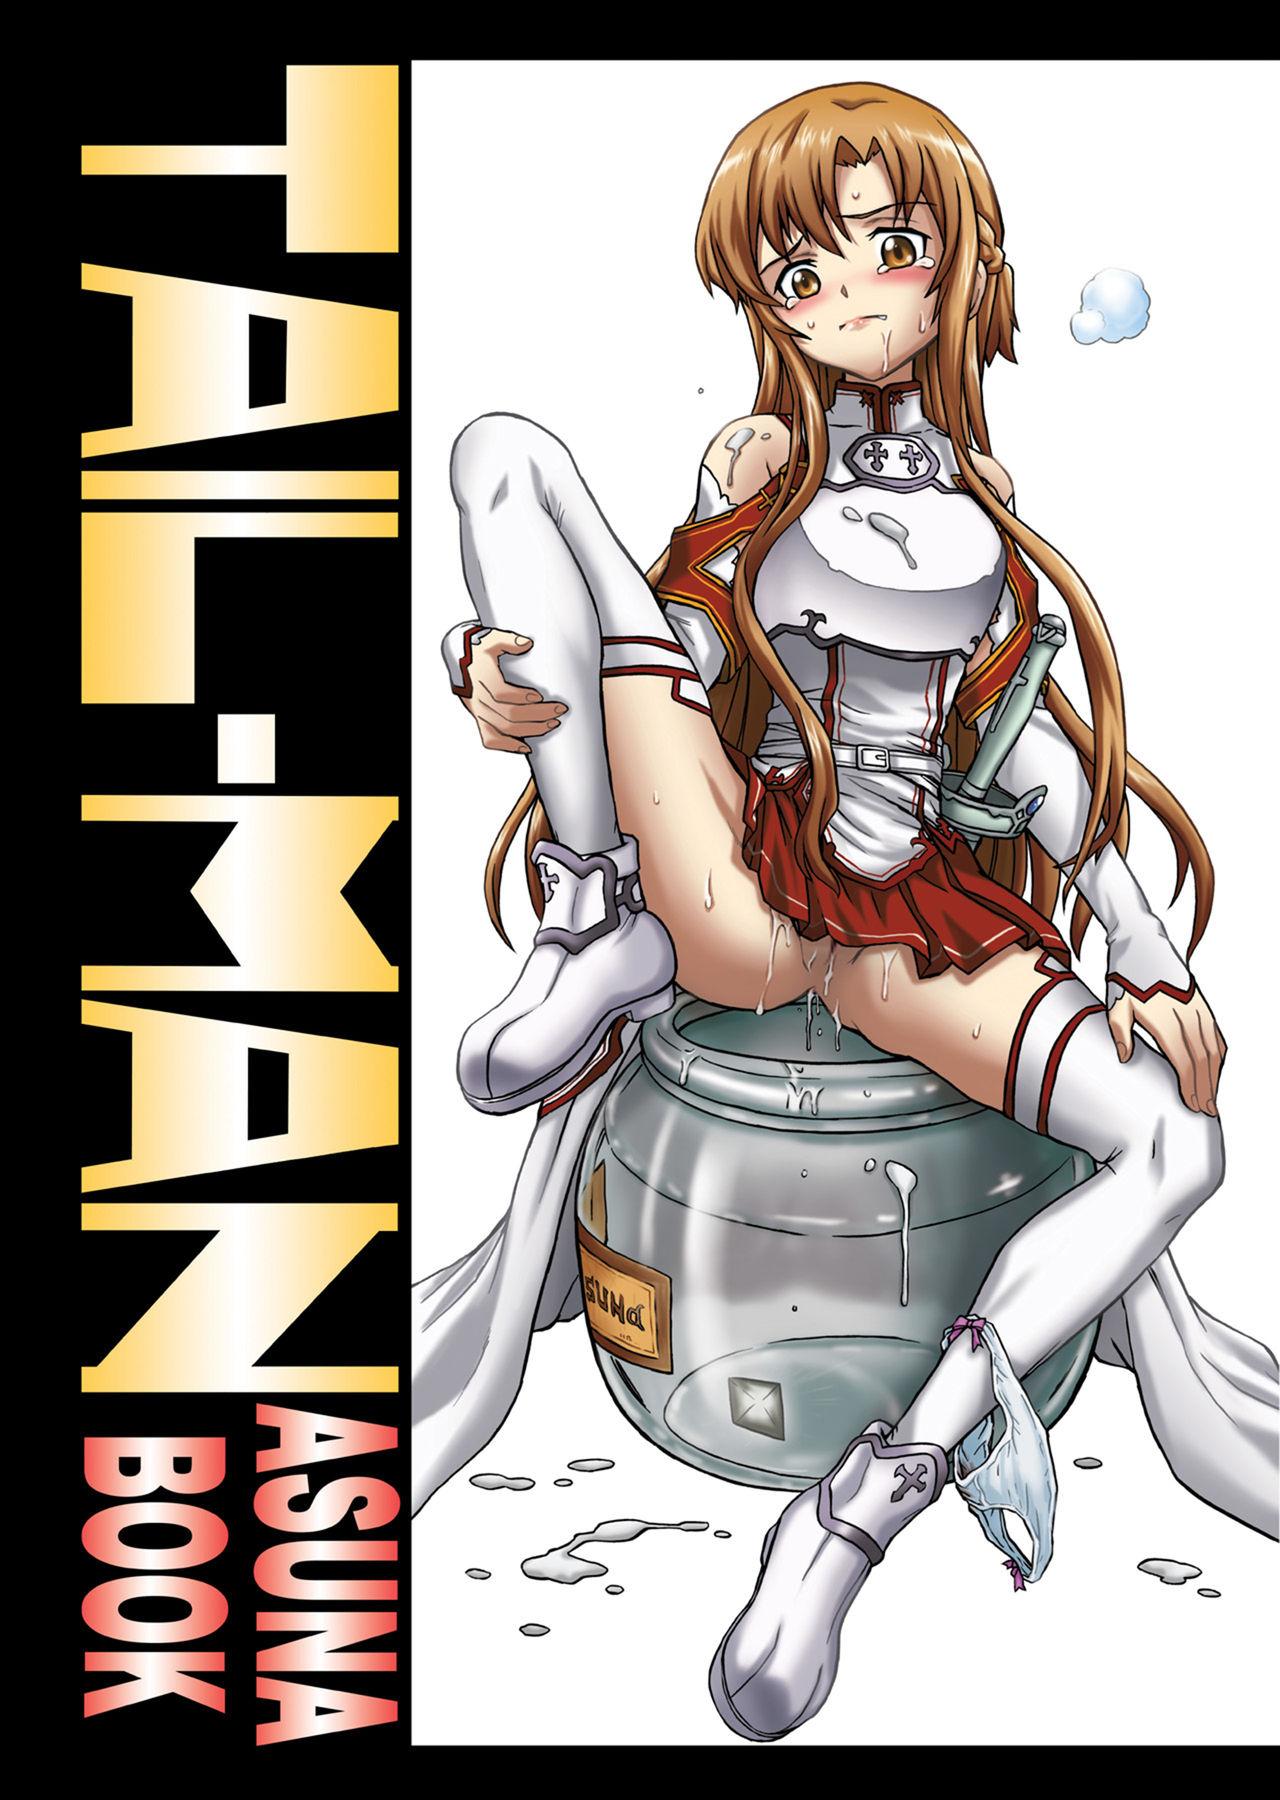 Tiny Titties TAIL-MAN ASUNA BOOK - Sword art online Free 18 Year Old Porn - Page 1